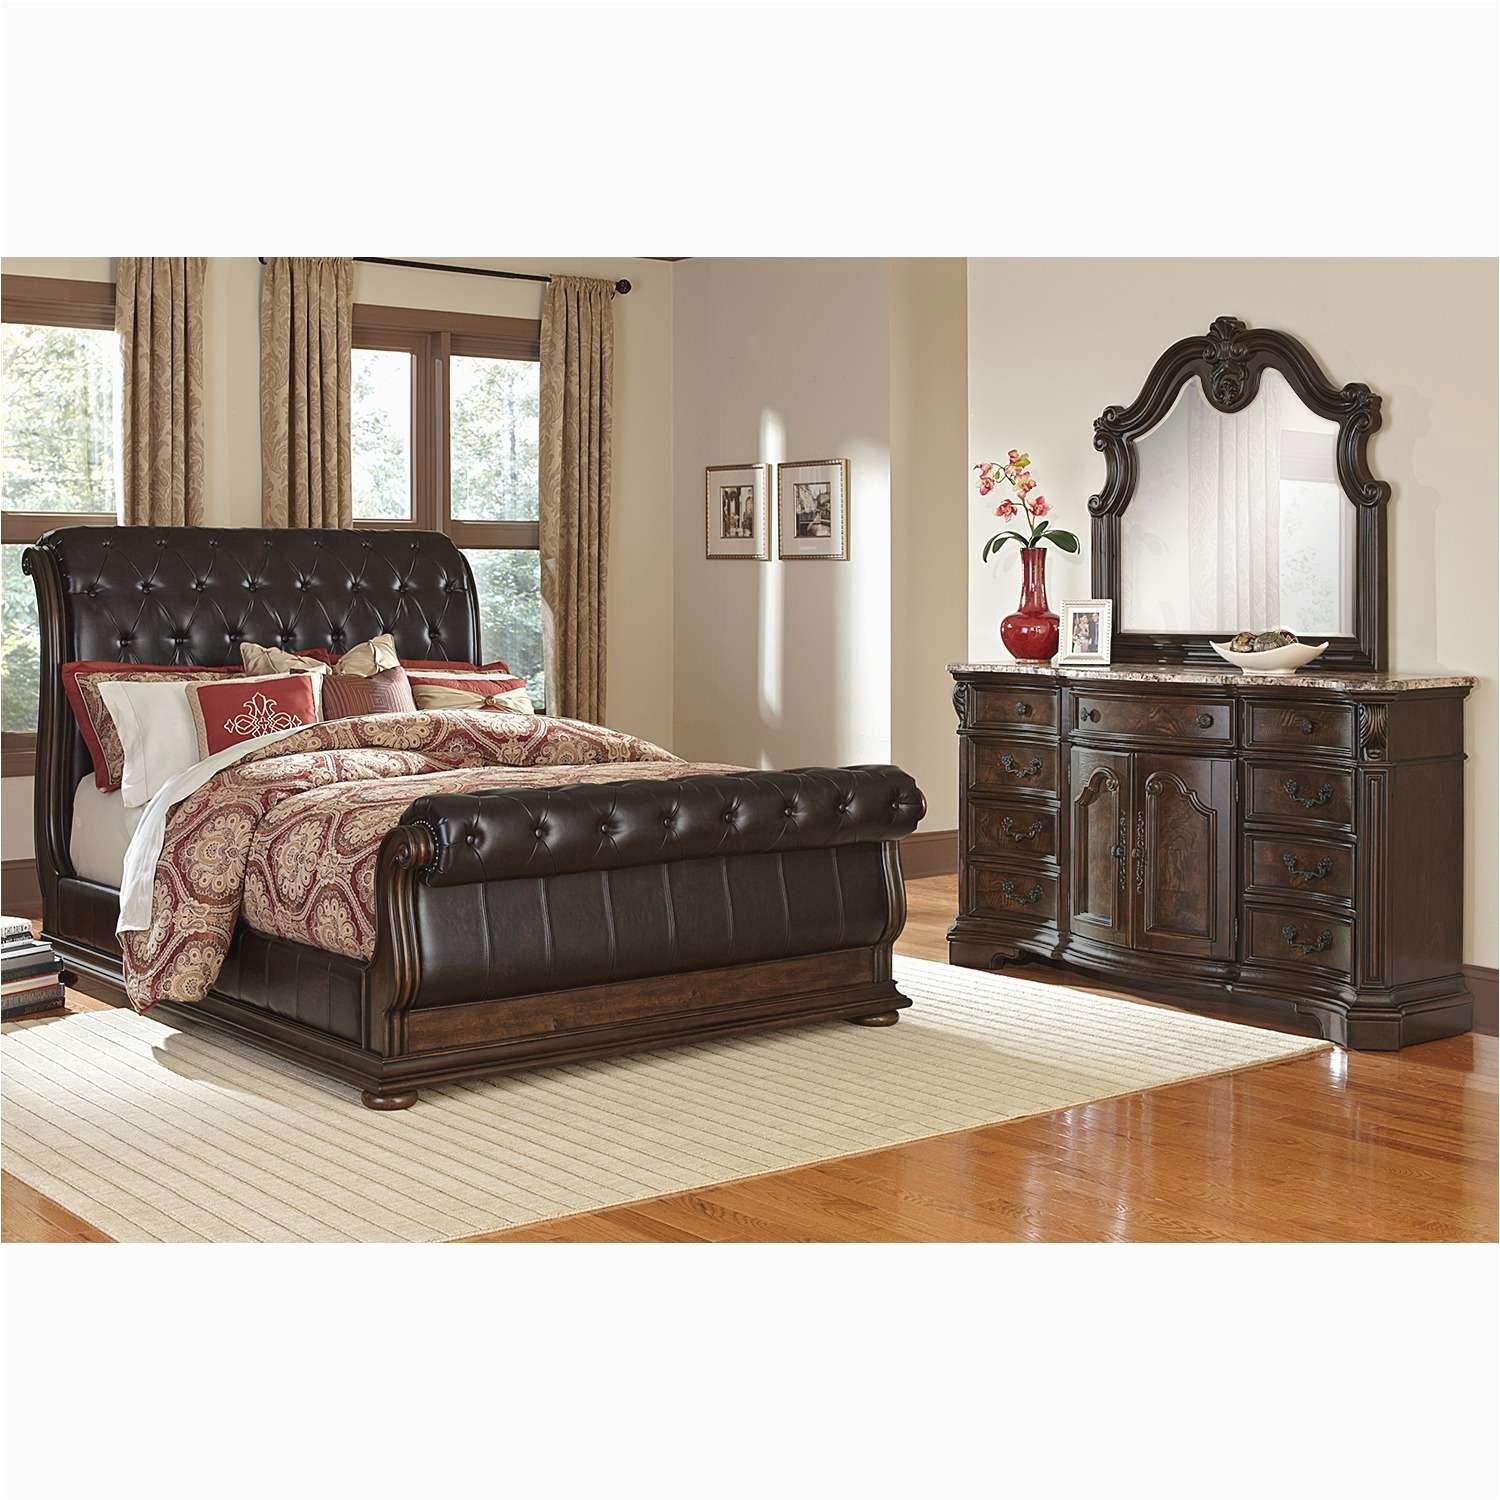 value city king size bedroom sets new value city furniture bedroom set awesome 98 stunning dining